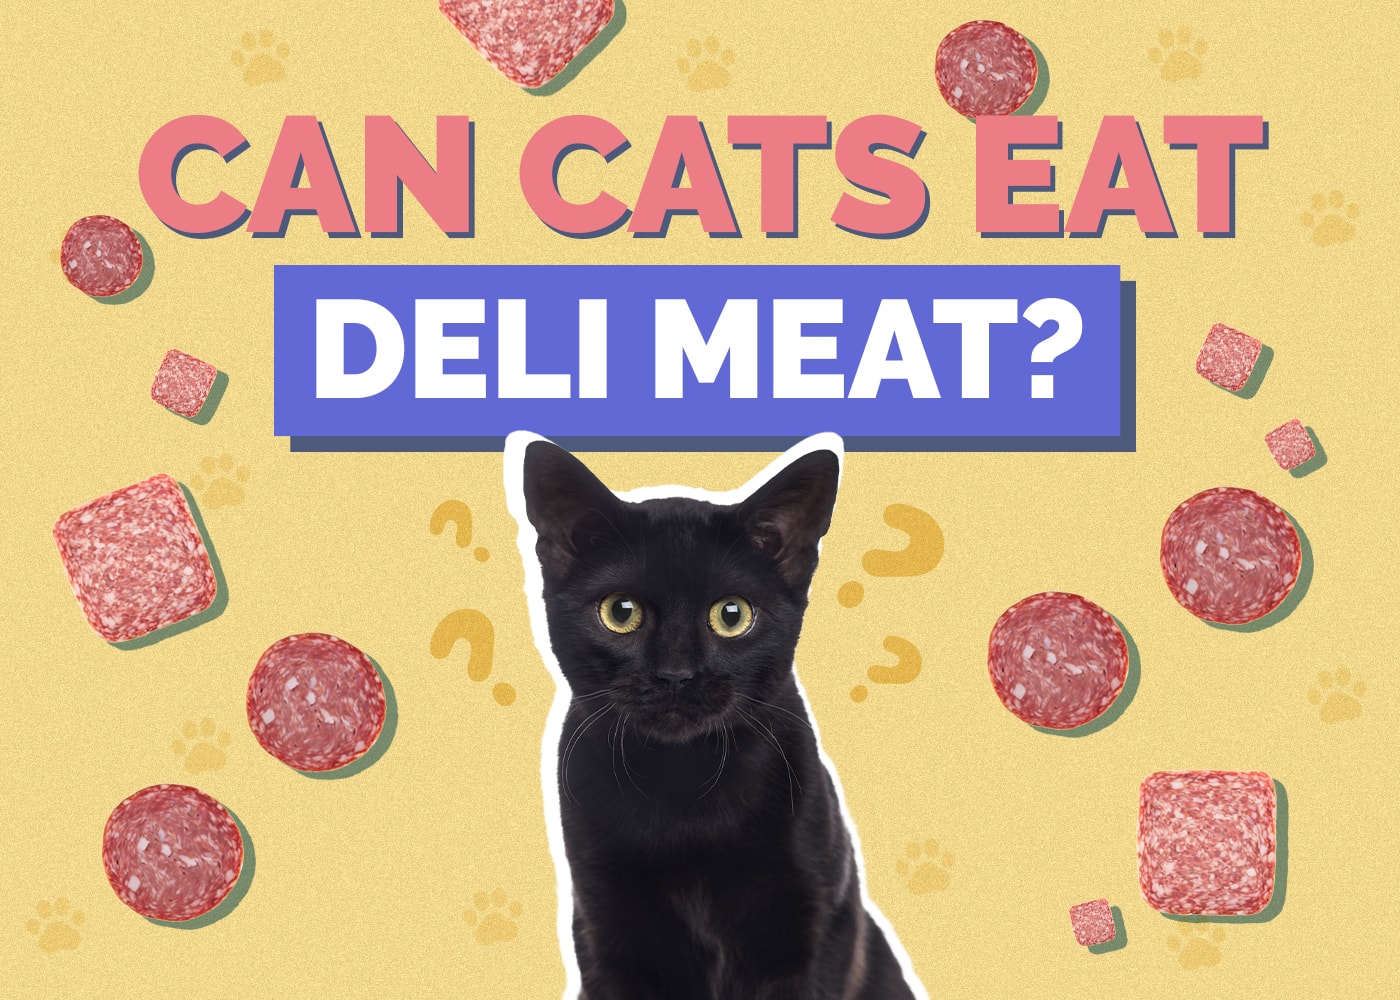 Can Cats Eat deli-meat